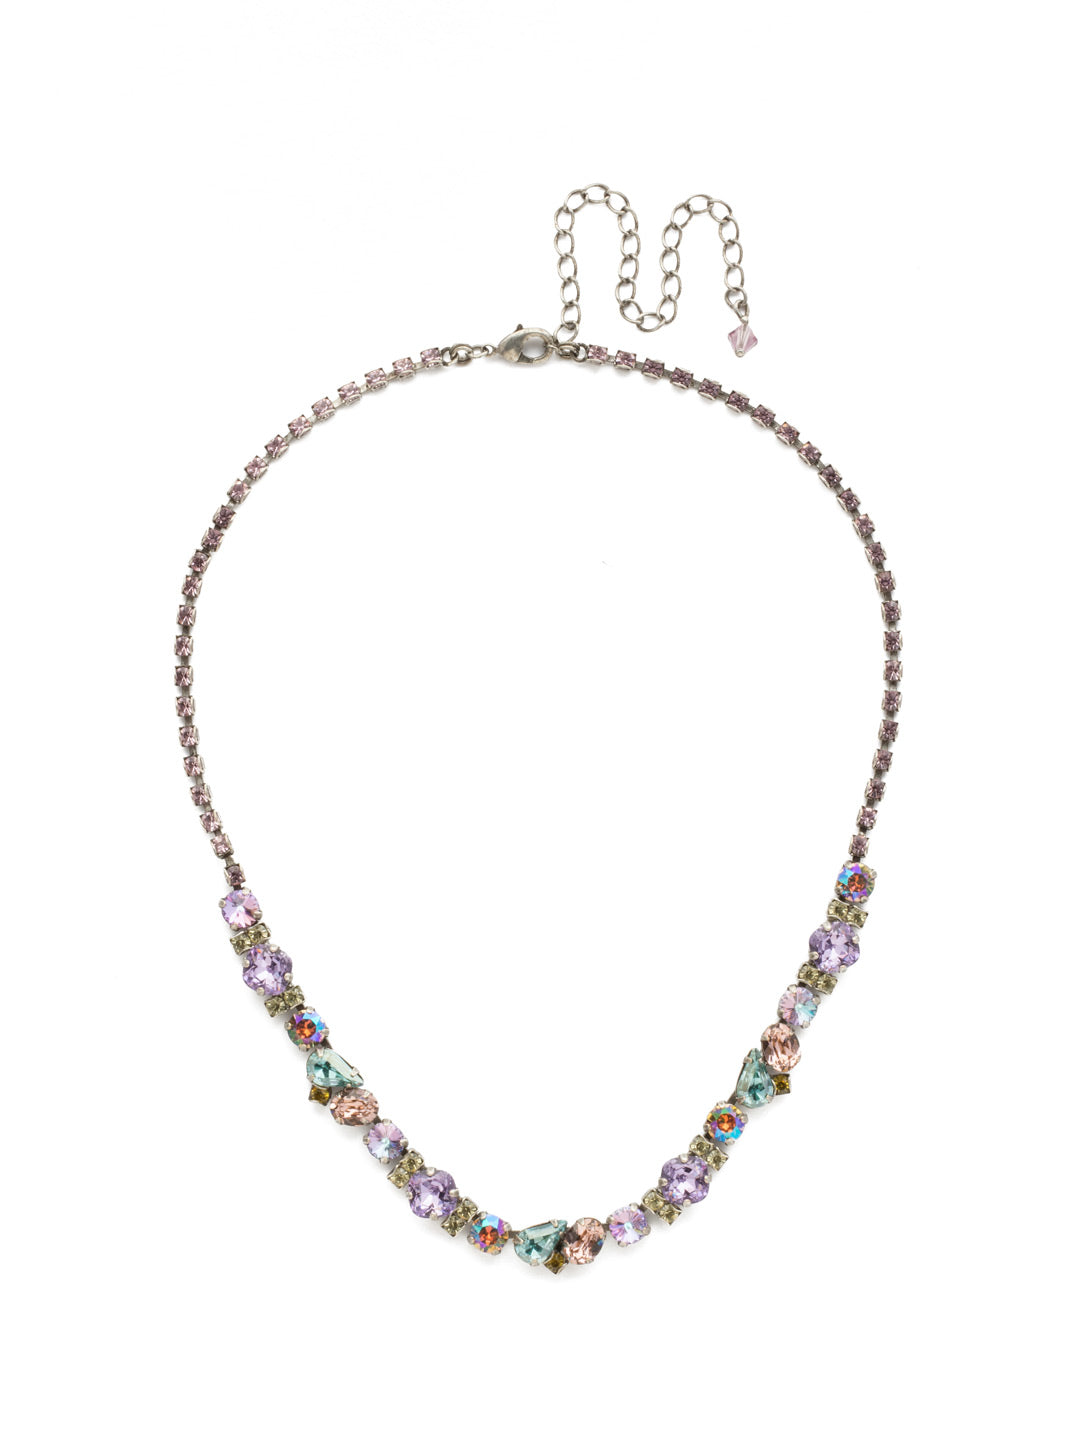 Fall 2018 One-of-a-Kind Necklace - NDU6ASLPA - A unique design from our Fall 2018 colorways that won't last long!